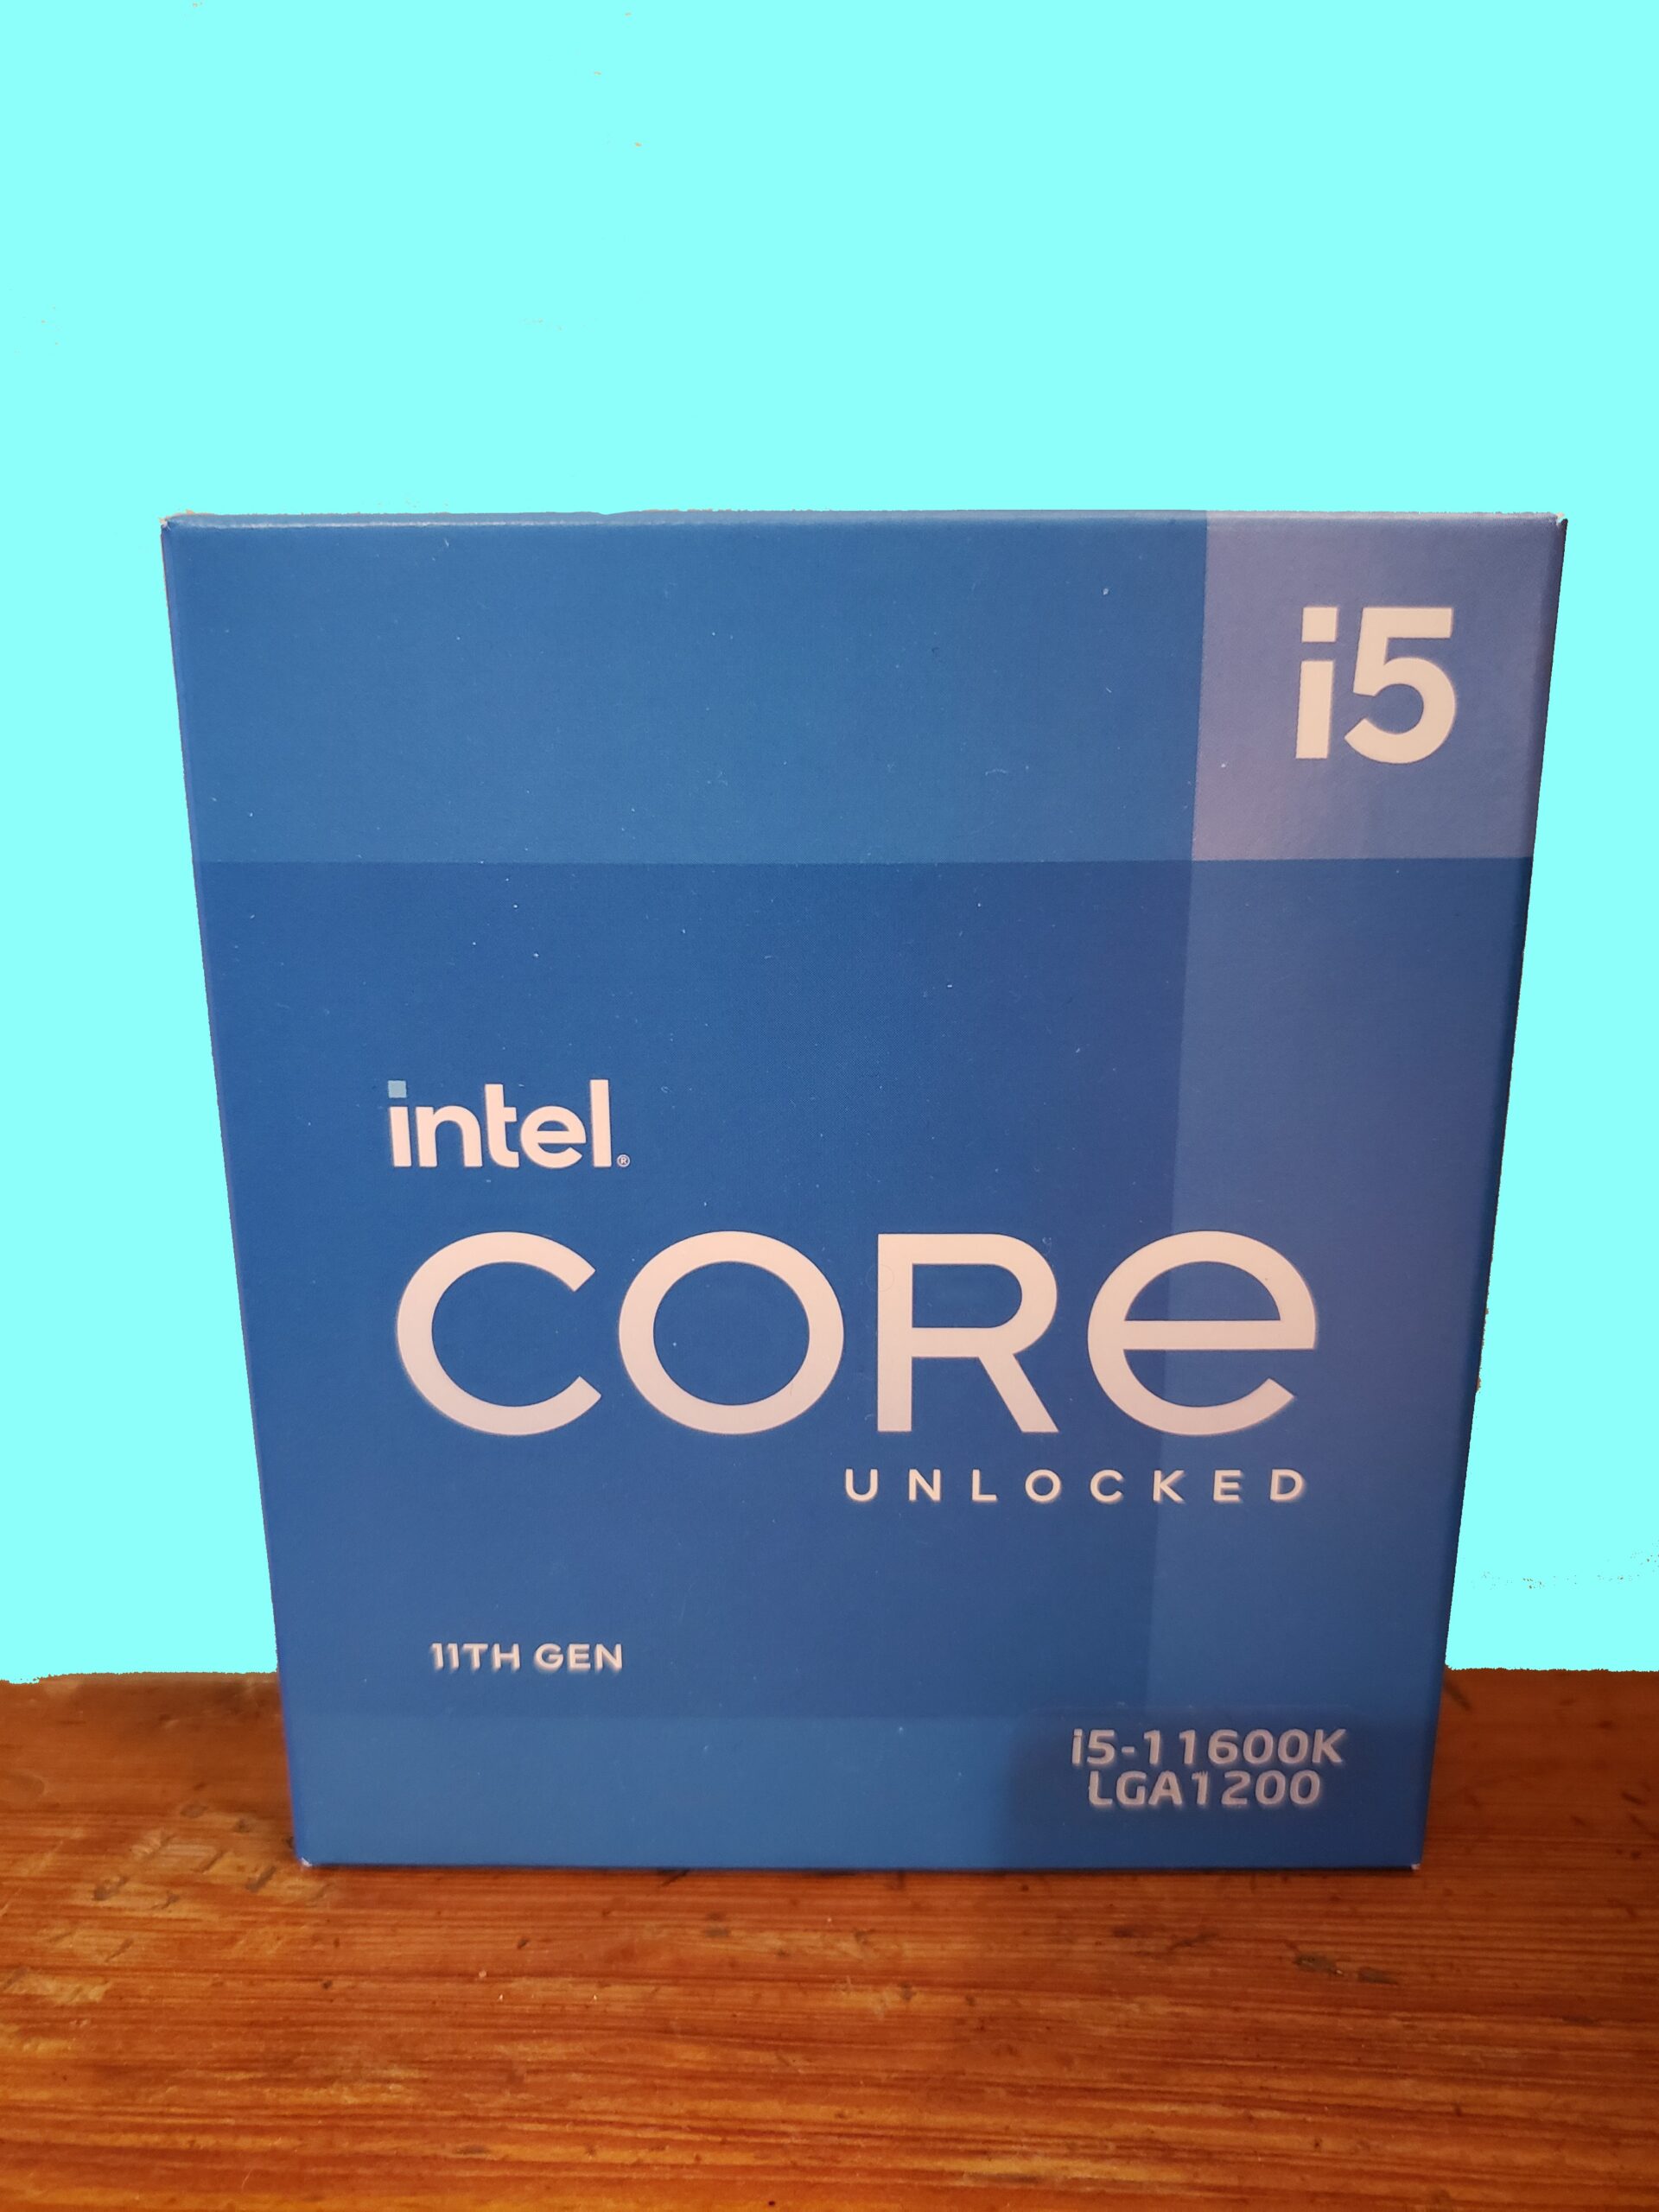 Intel Core i5-11600K Review, Benchmarks, and Comparisons